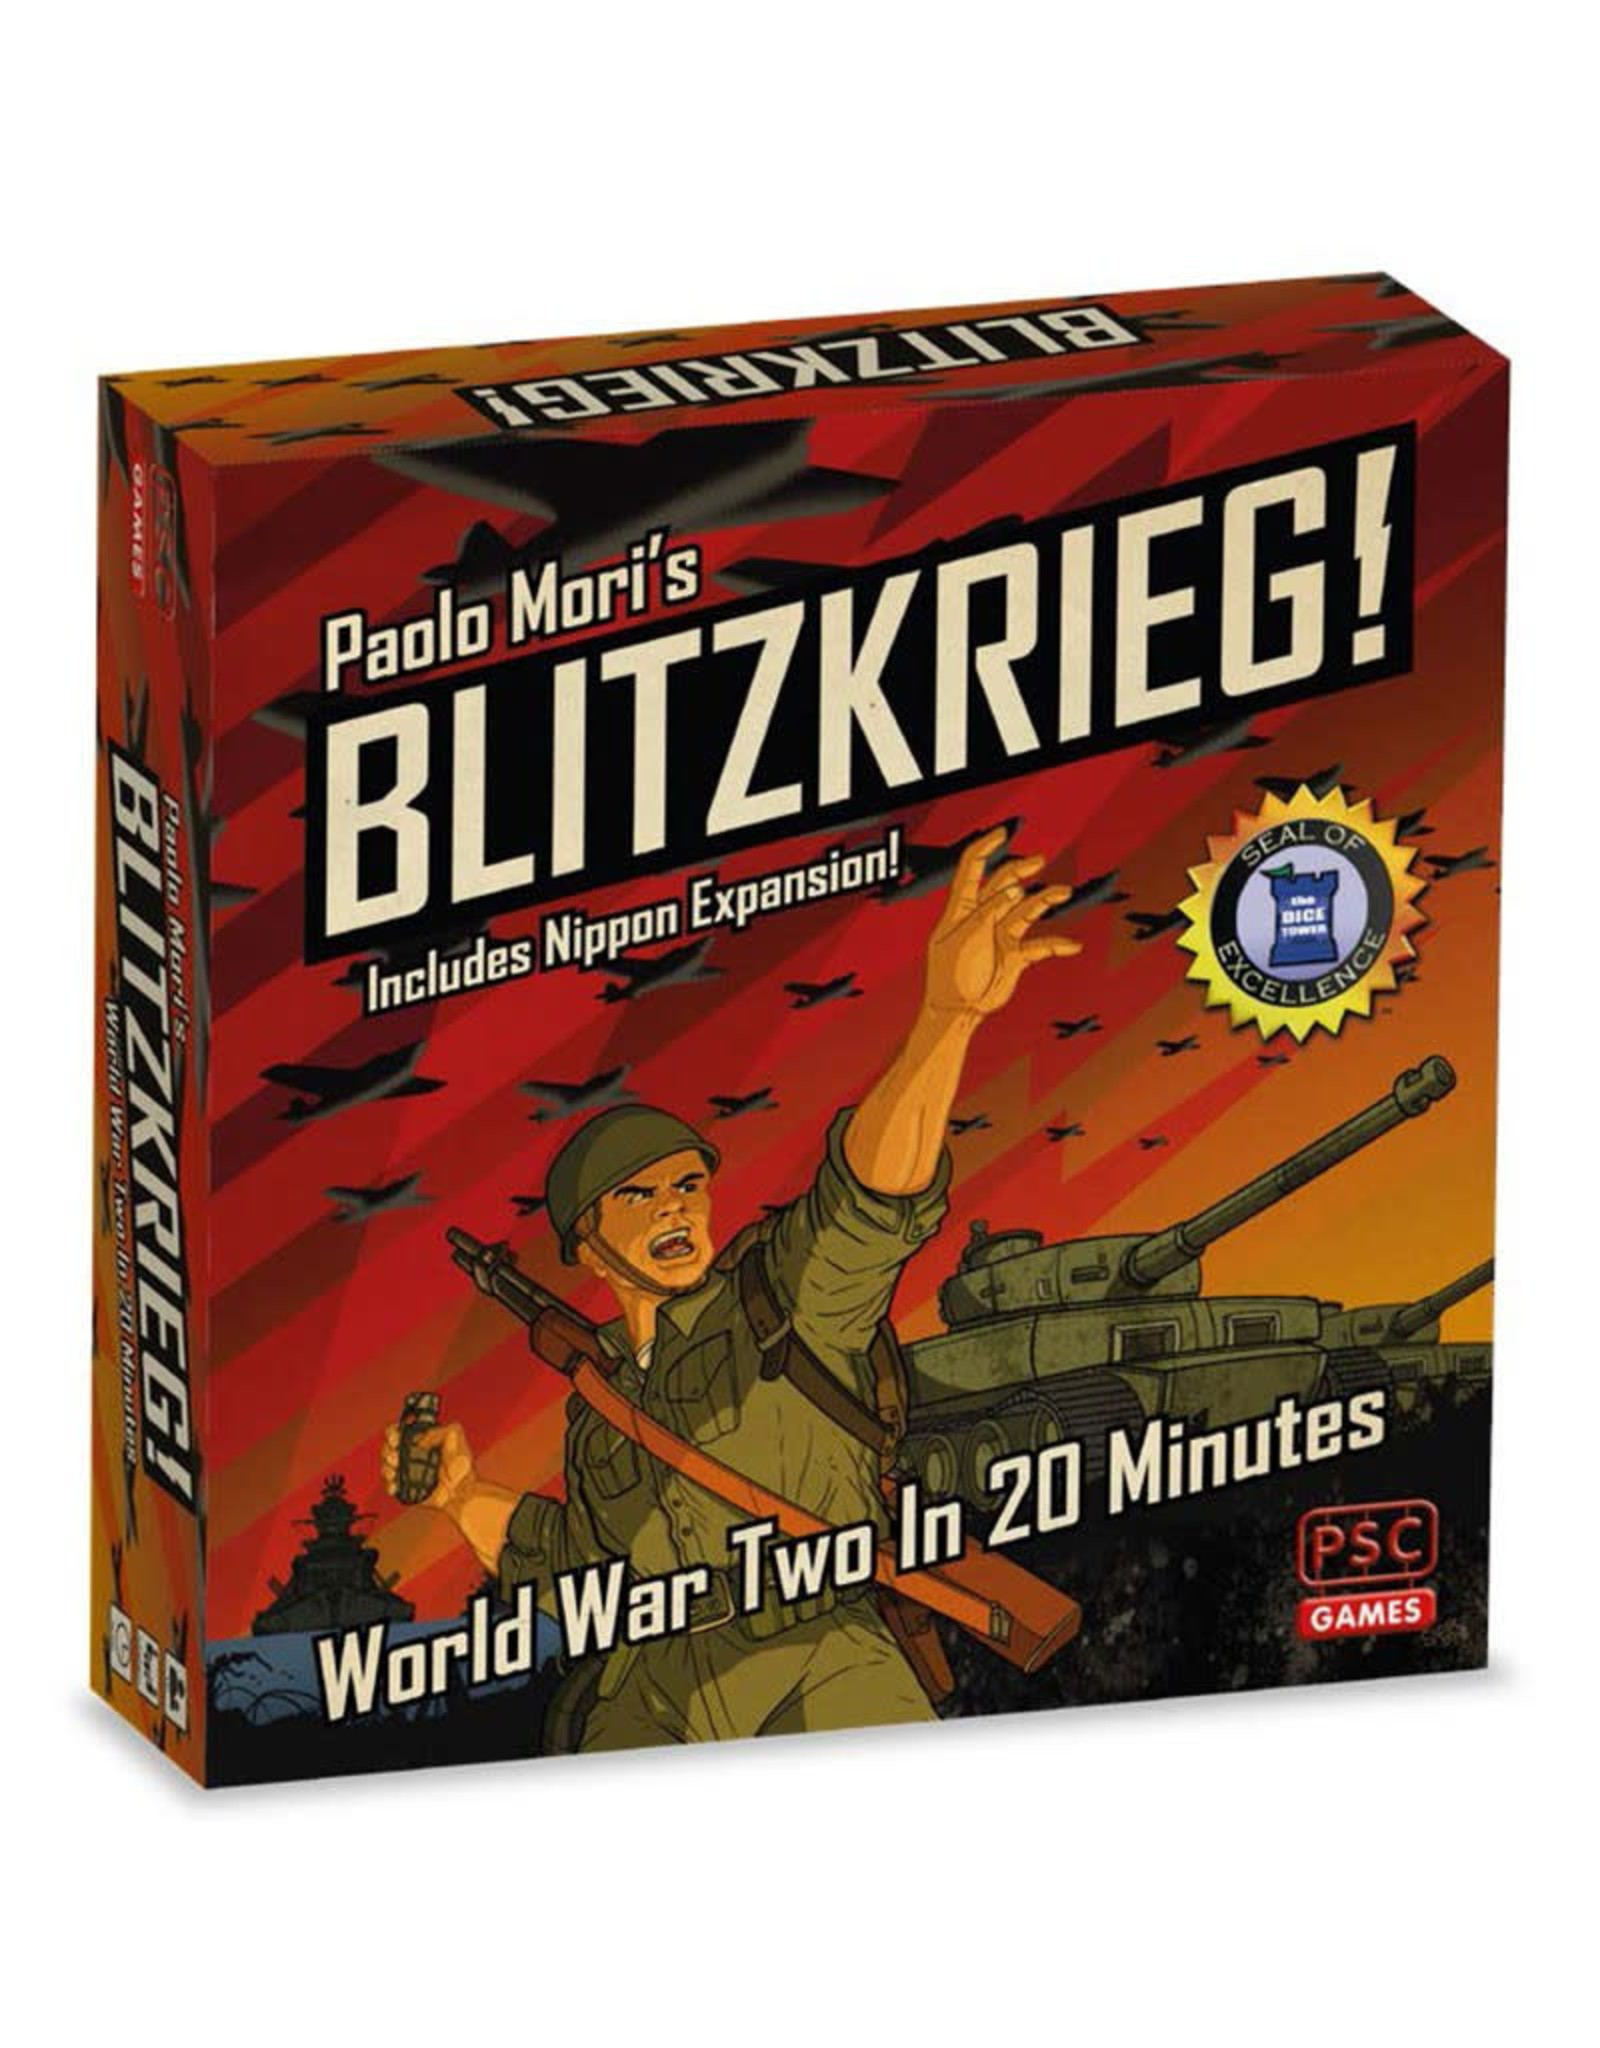 Misc Blitzkrieg! World War Two in 20 Minutes!